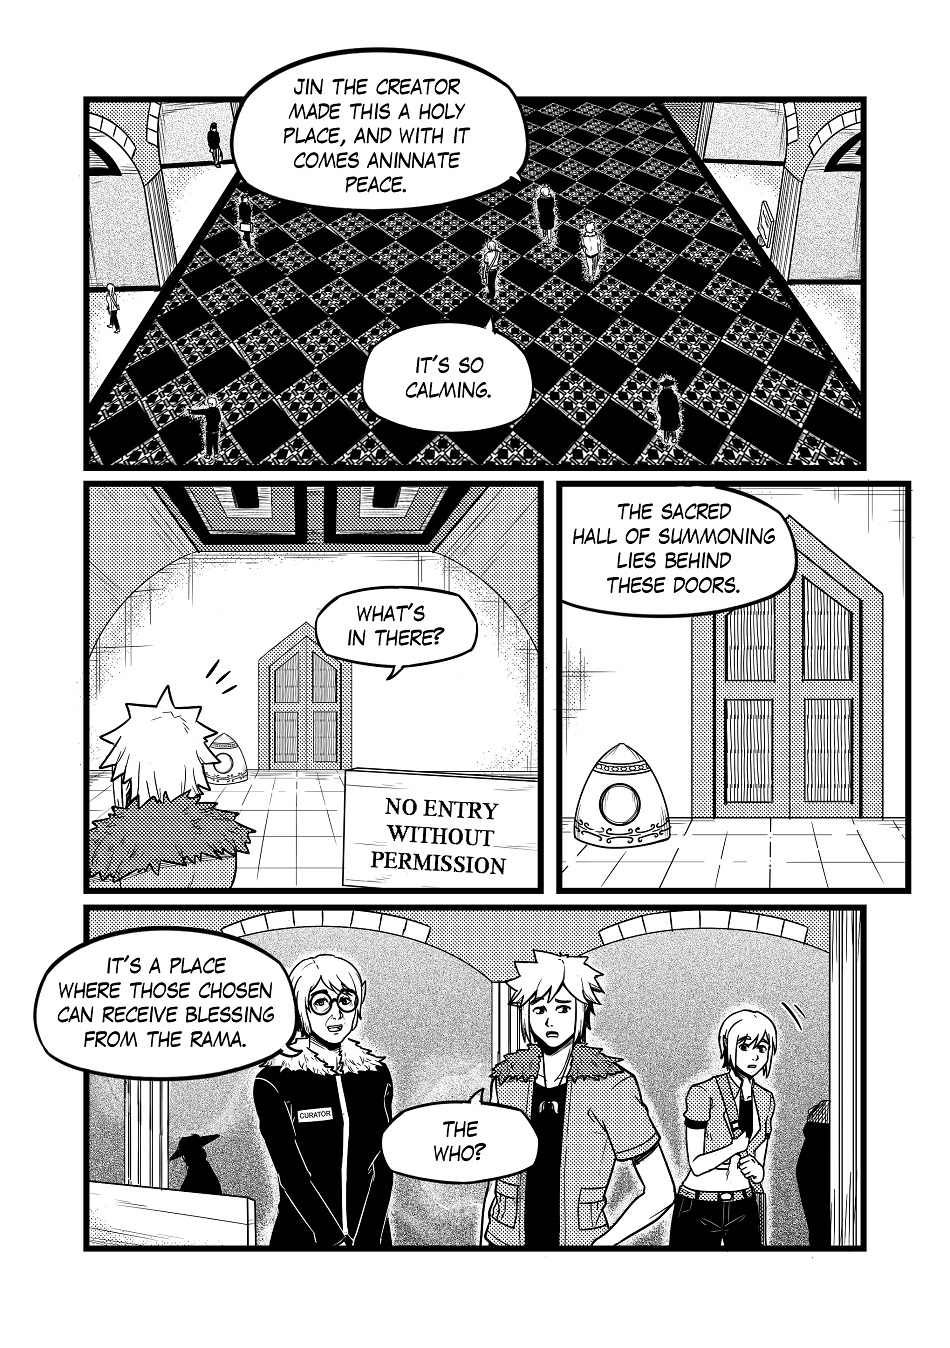 DAWN: Chapter 2 Pages 18-21